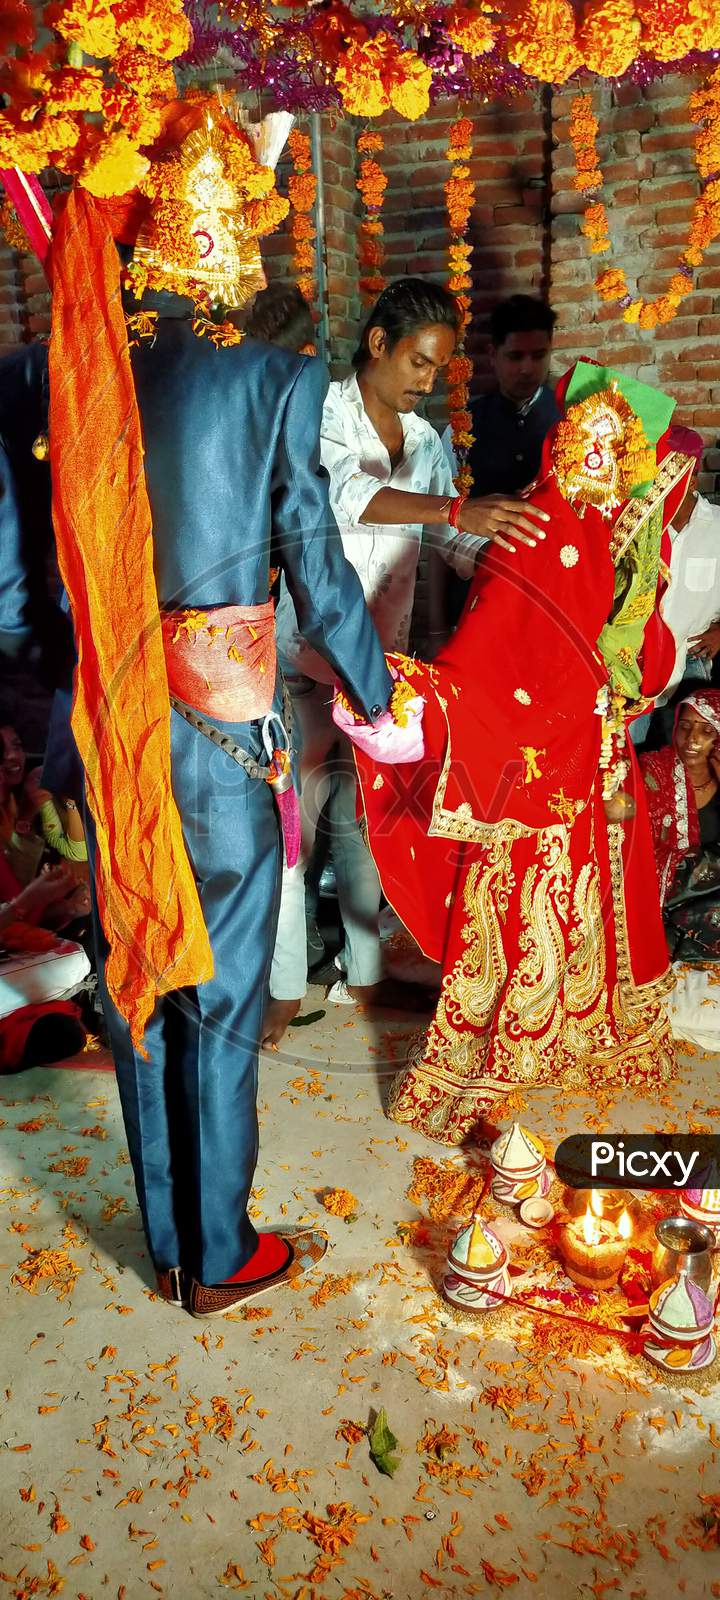 The traditional Rajasthani Indian Marriage